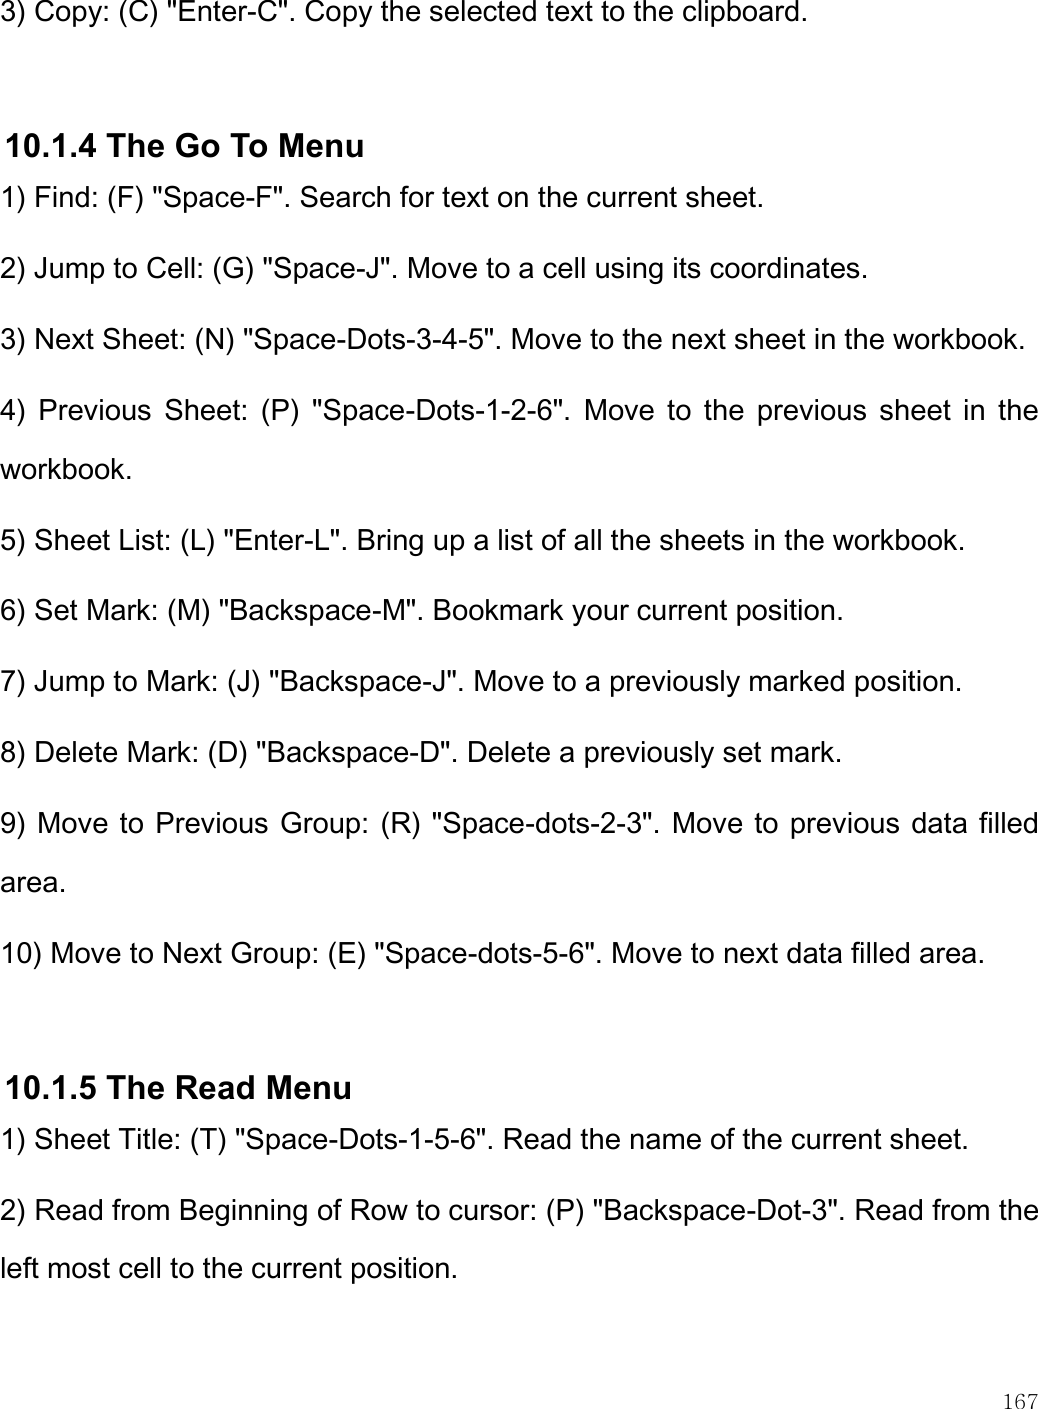    167  3) Copy: (C) &quot;Enter-C&quot;. Copy the selected text to the clipboard.  10.1.4 The Go To Menu 1) Find: (F) &quot;Space-F&quot;. Search for text on the current sheet. 2) Jump to Cell: (G) &quot;Space-J&quot;. Move to a cell using its coordinates. 3) Next Sheet: (N) &quot;Space-Dots-3-4-5&quot;. Move to the next sheet in the workbook. 4)  Previous  Sheet:  (P)  &quot;Space-Dots-1-2-6&quot;.  Move to  the  previous sheet  in  the workbook. 5) Sheet List: (L) &quot;Enter-L&quot;. Bring up a list of all the sheets in the workbook. 6) Set Mark: (M) &quot;Backspace-M&quot;. Bookmark your current position. 7) Jump to Mark: (J) &quot;Backspace-J&quot;. Move to a previously marked position. 8) Delete Mark: (D) &quot;Backspace-D&quot;. Delete a previously set mark. 9) Move to Previous Group: (R) &quot;Space-dots-2-3&quot;. Move to previous data filled area. 10) Move to Next Group: (E) &quot;Space-dots-5-6&quot;. Move to next data filled area.  10.1.5 The Read Menu 1) Sheet Title: (T) &quot;Space-Dots-1-5-6&quot;. Read the name of the current sheet. 2) Read from Beginning of Row to cursor: (P) &quot;Backspace-Dot-3&quot;. Read from the left most cell to the current position. 